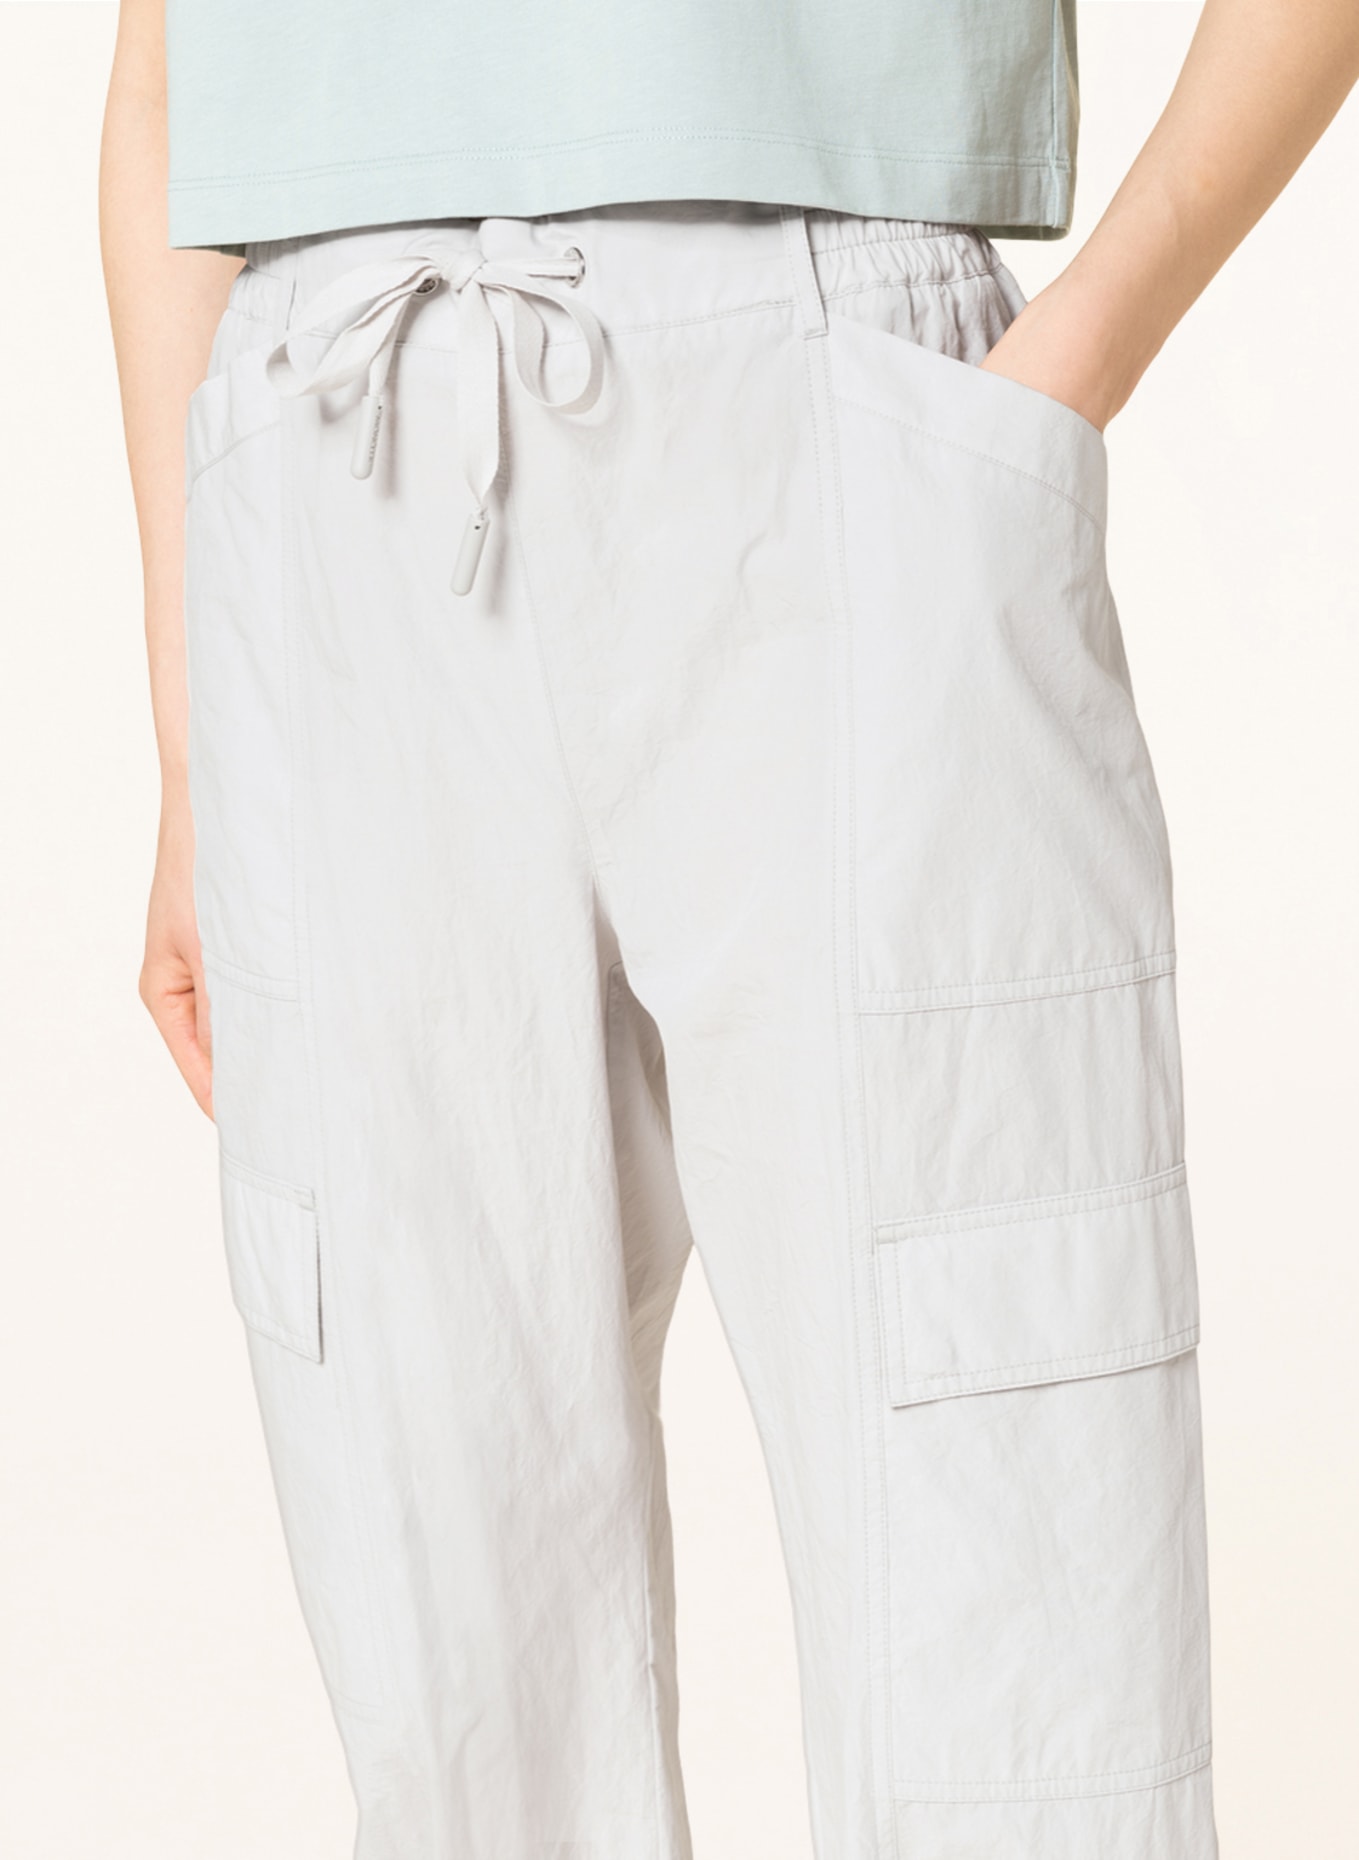 MONCLER Pants in jogger style, Color: LIGHT GRAY (Image 5)